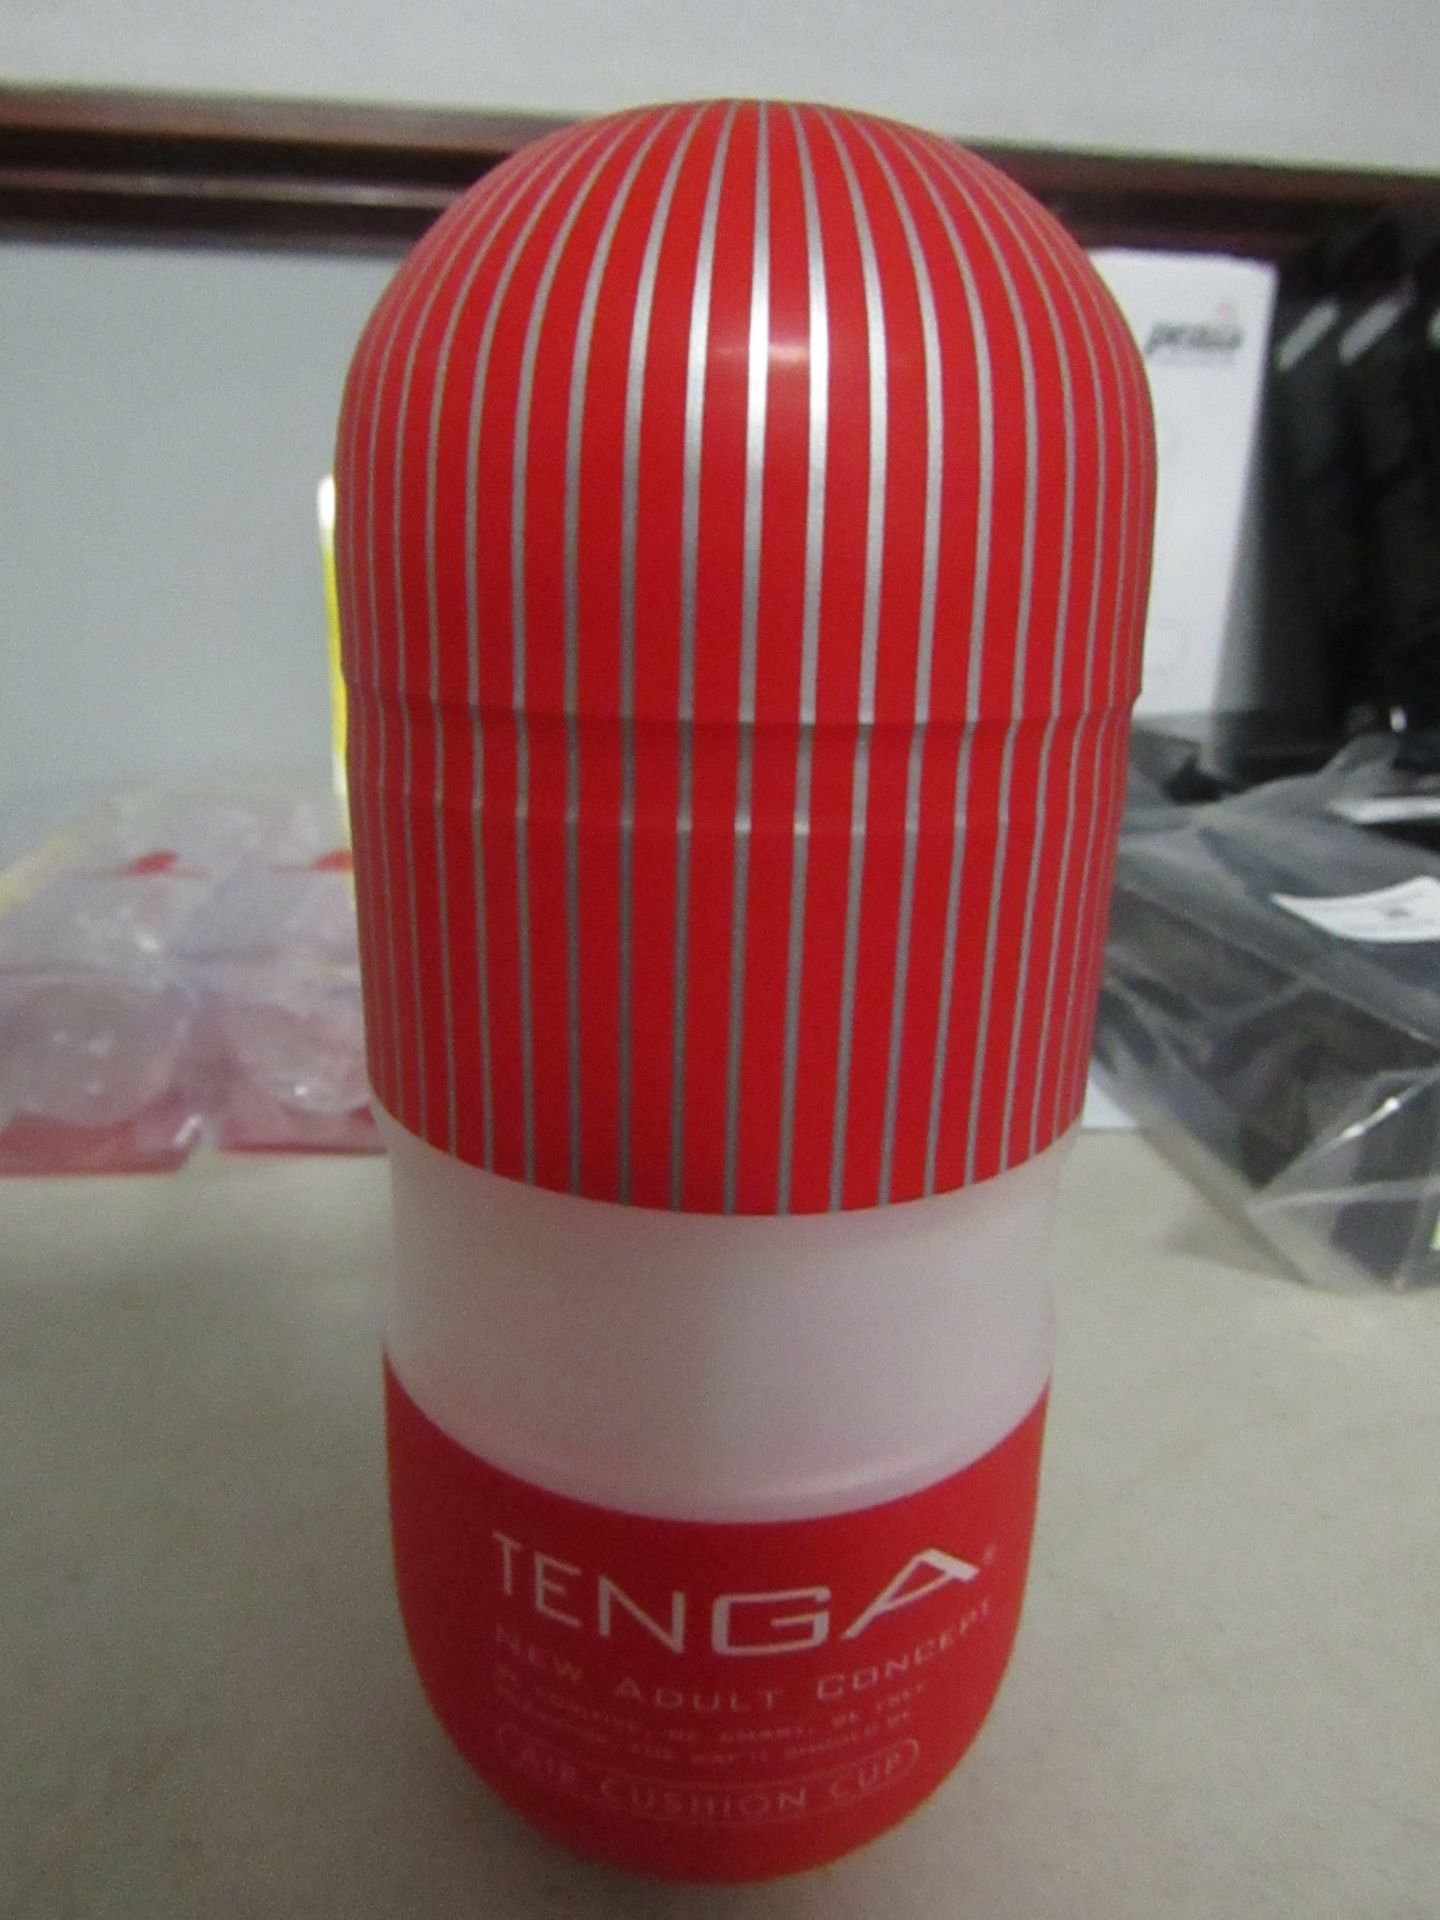 Tenga Air cushion Cup Sex toy, new and still sealed